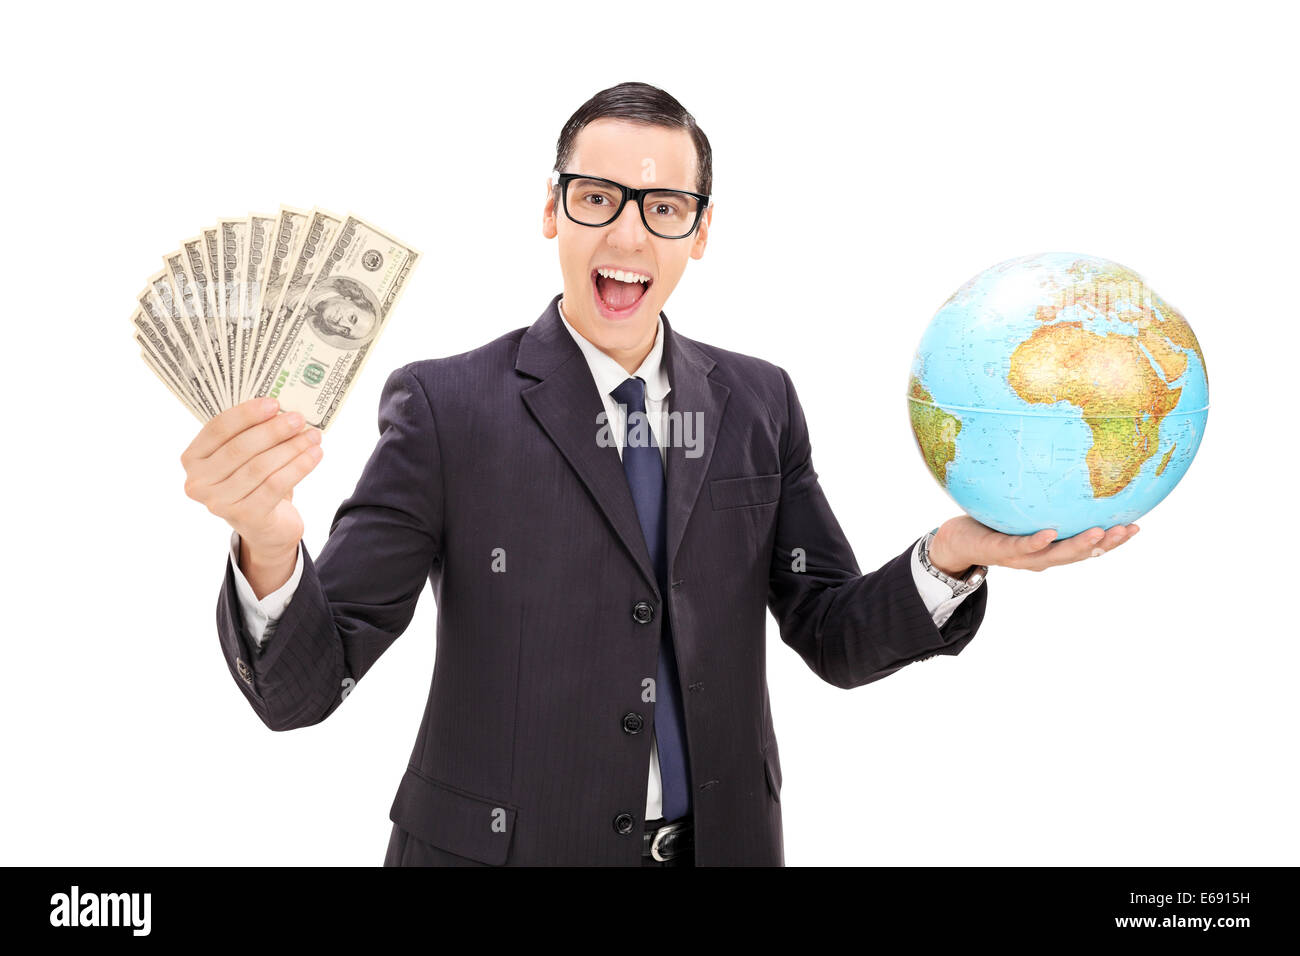 Wealthy businessman holding money and a globe isolated on white background Stock Photo